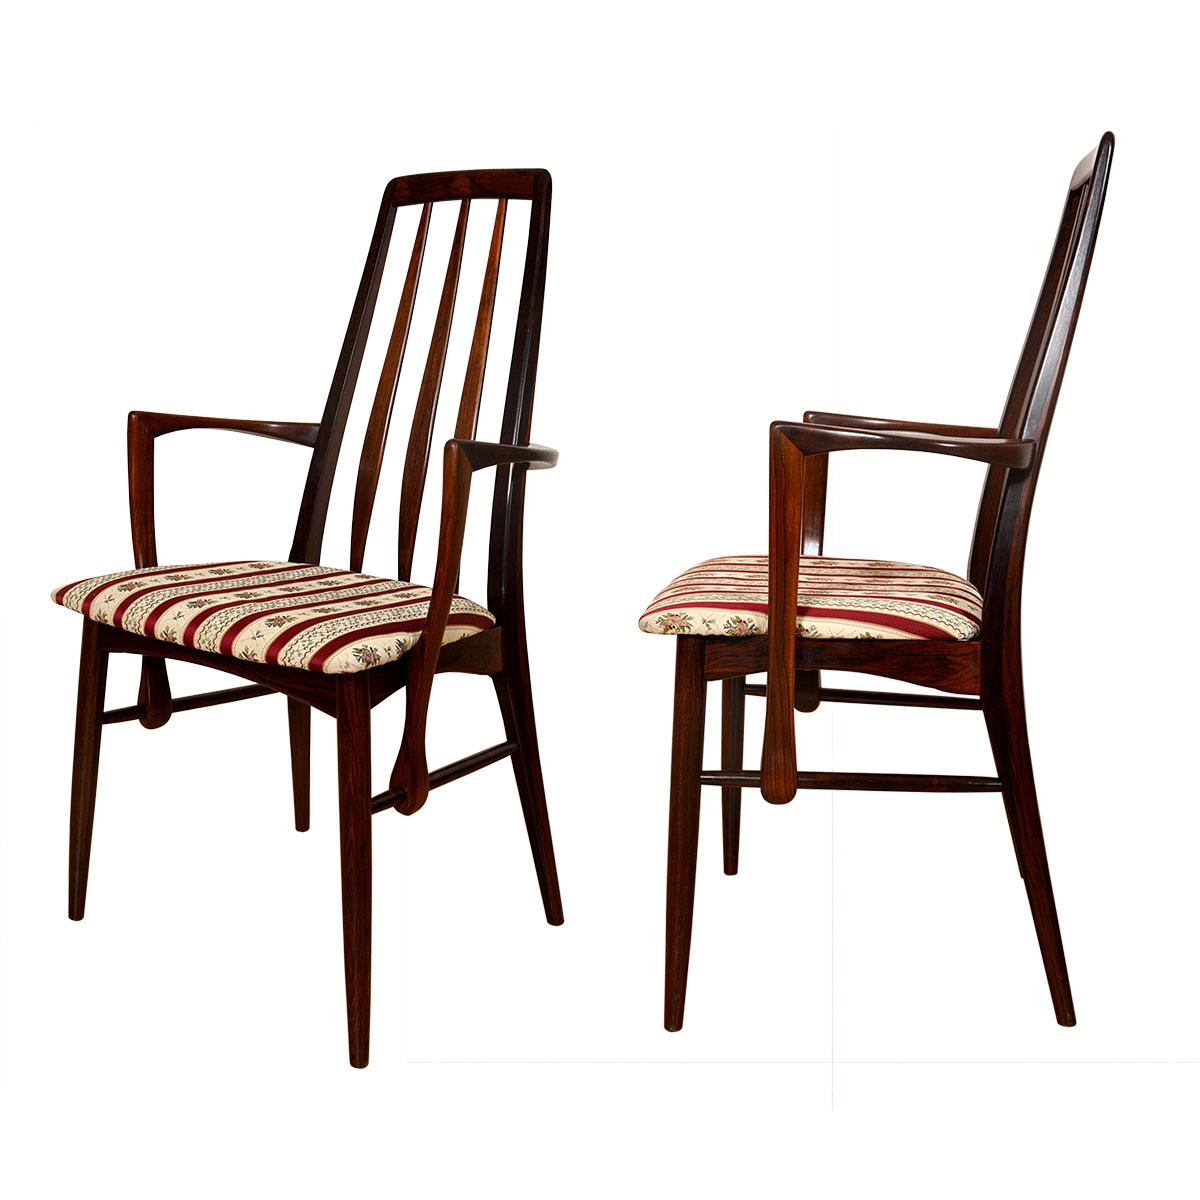 Pair of Danish Rosewood Arm Chairs by Koefoeds Hornslet In Excellent Condition For Sale In Kensington, MD